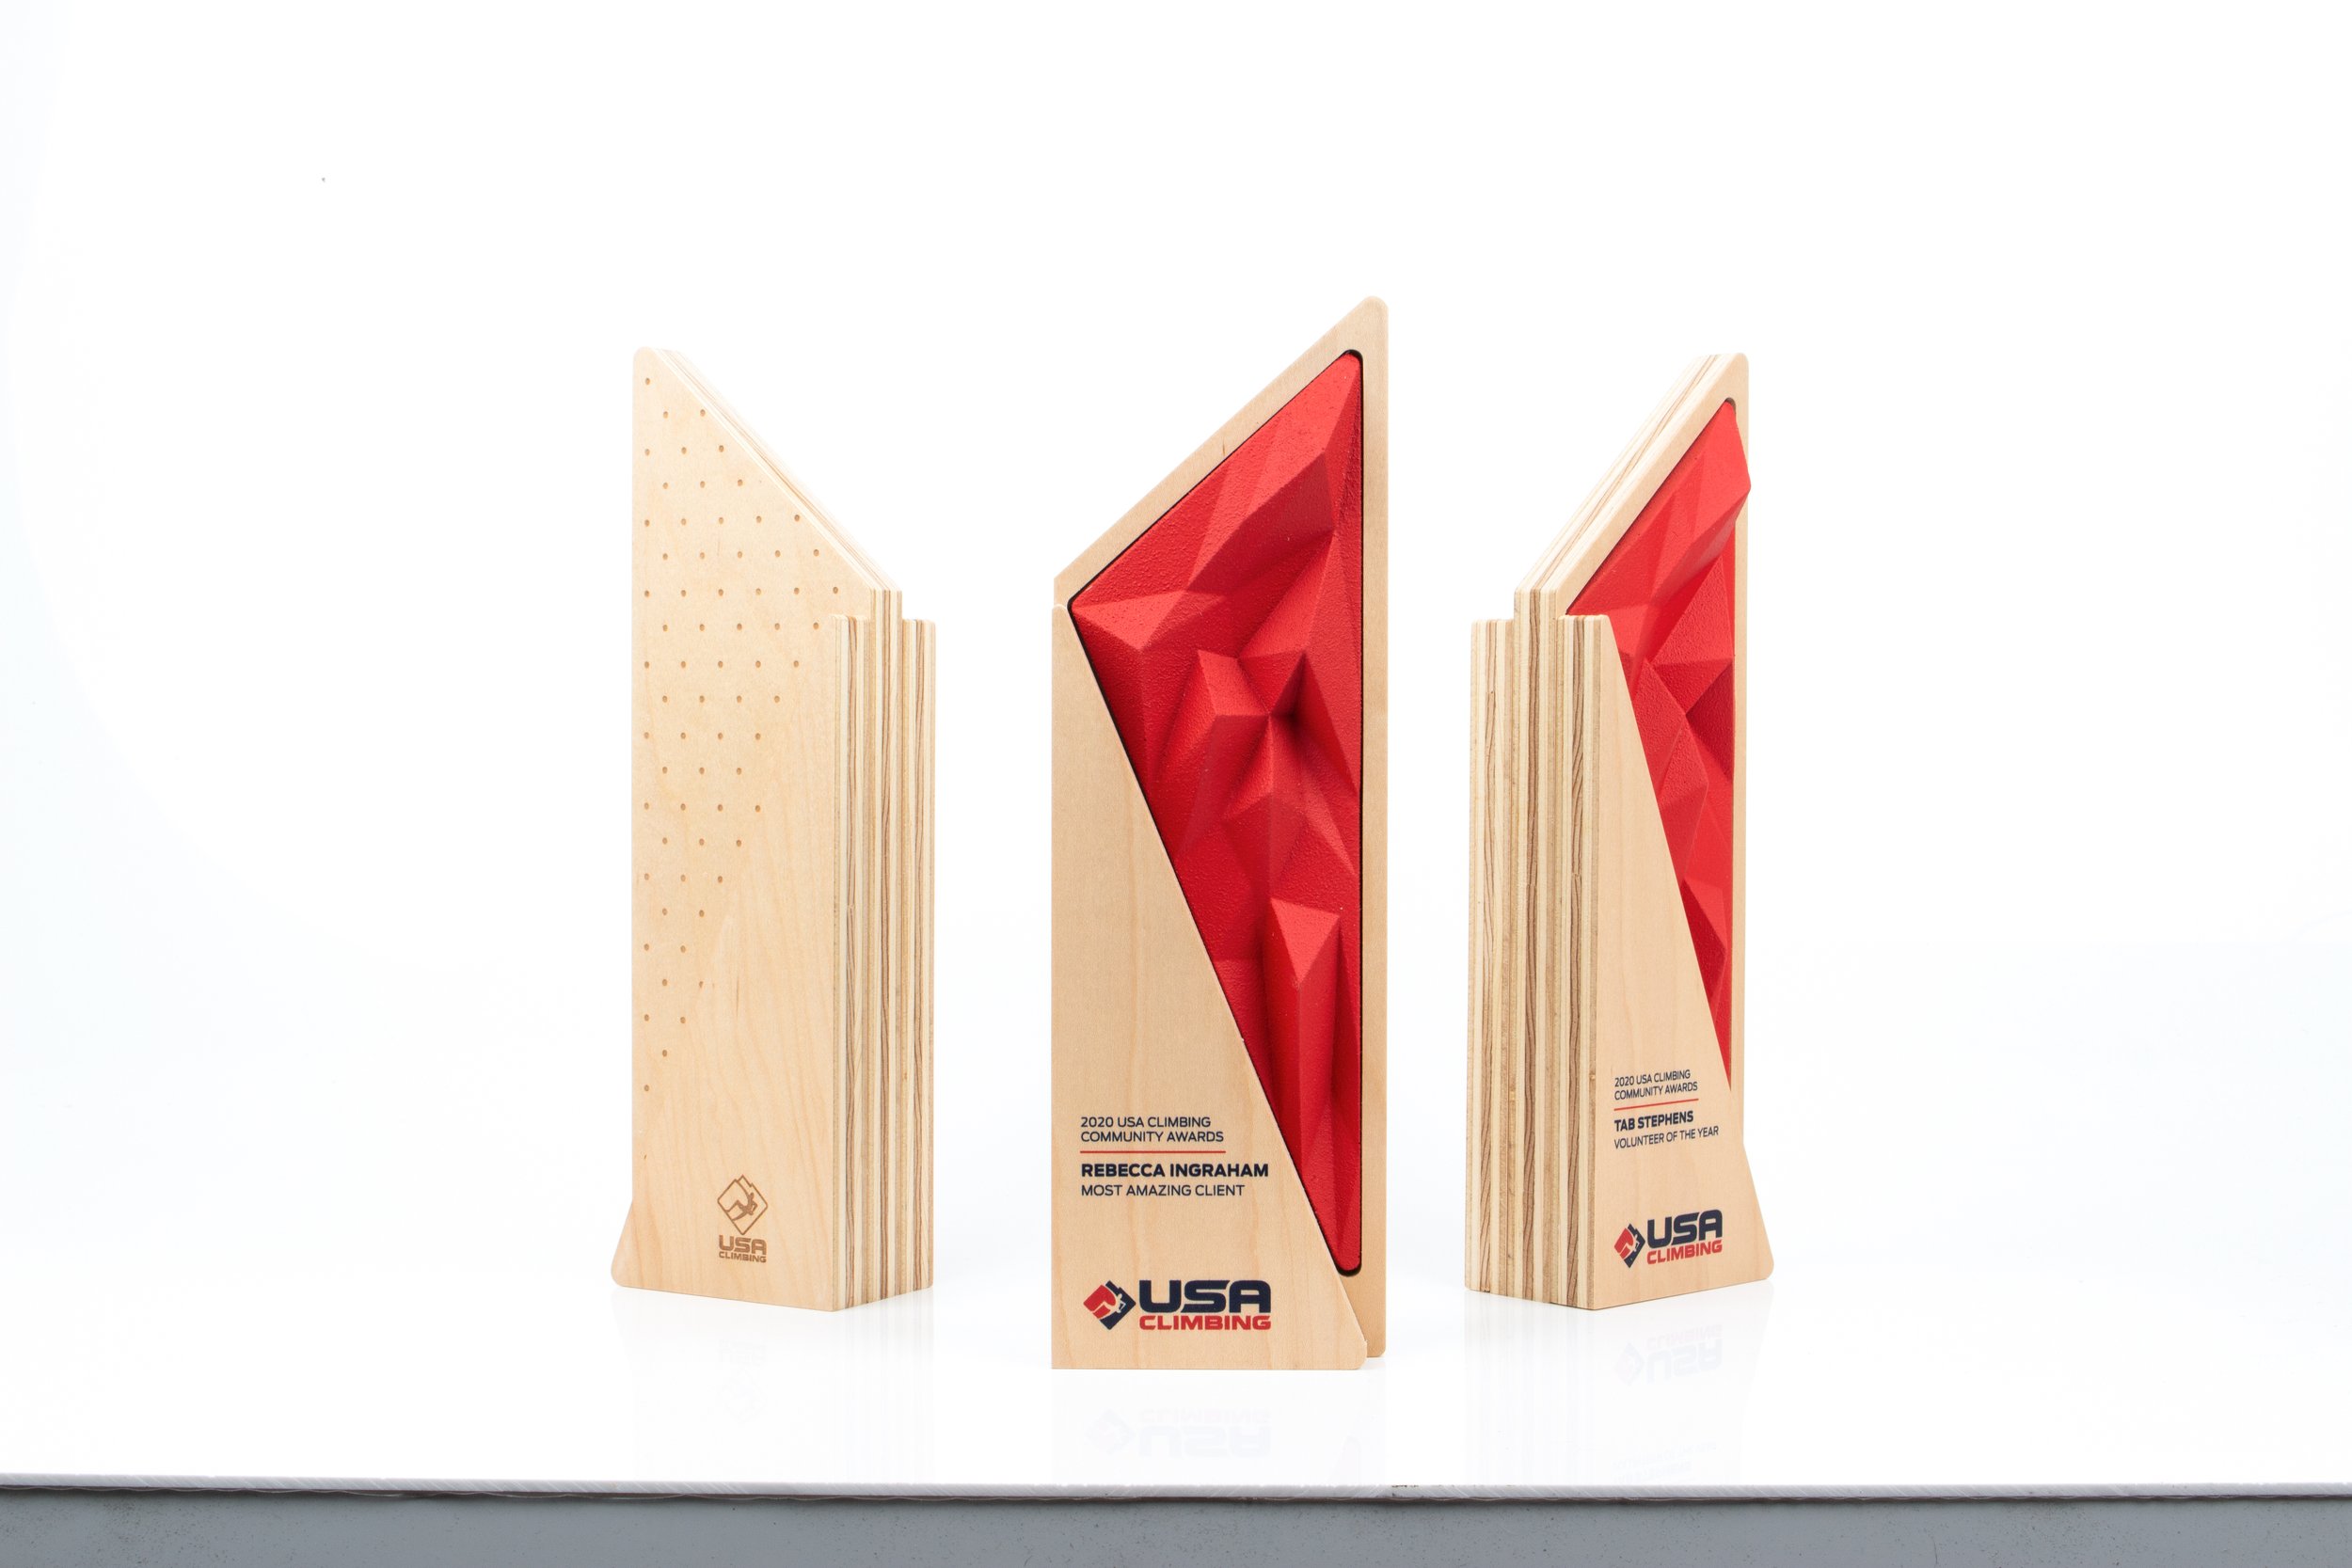 usa climbing bespoke trophies plywwod and resin 2